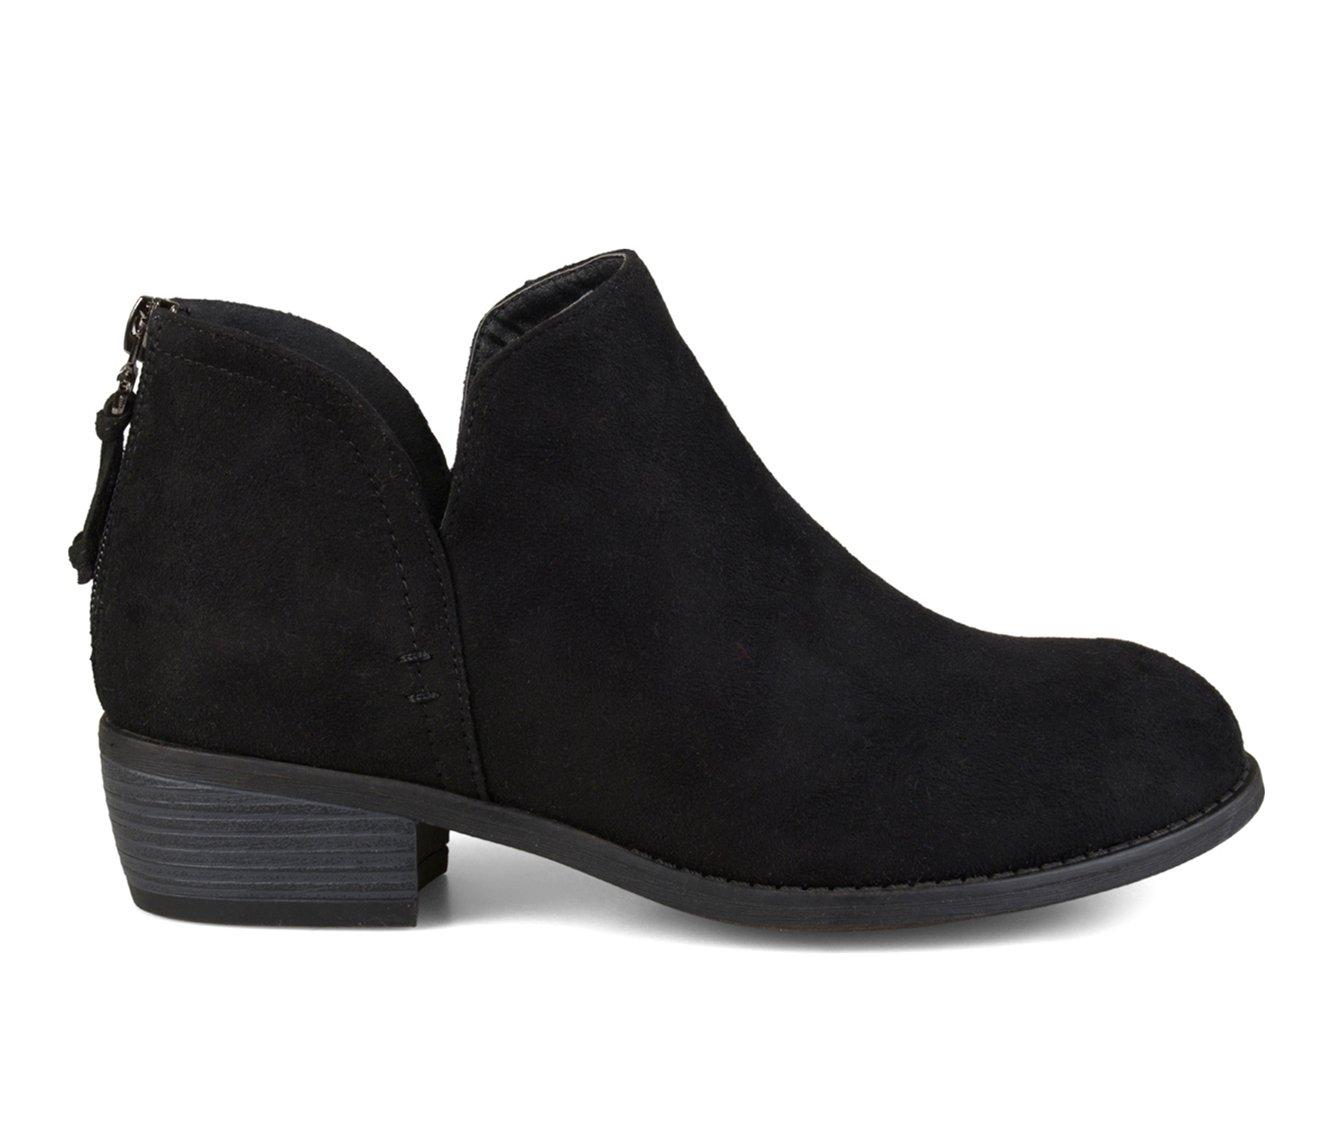 37 Best Low ankle boots ideas  low ankle boots, boots, ankle boots